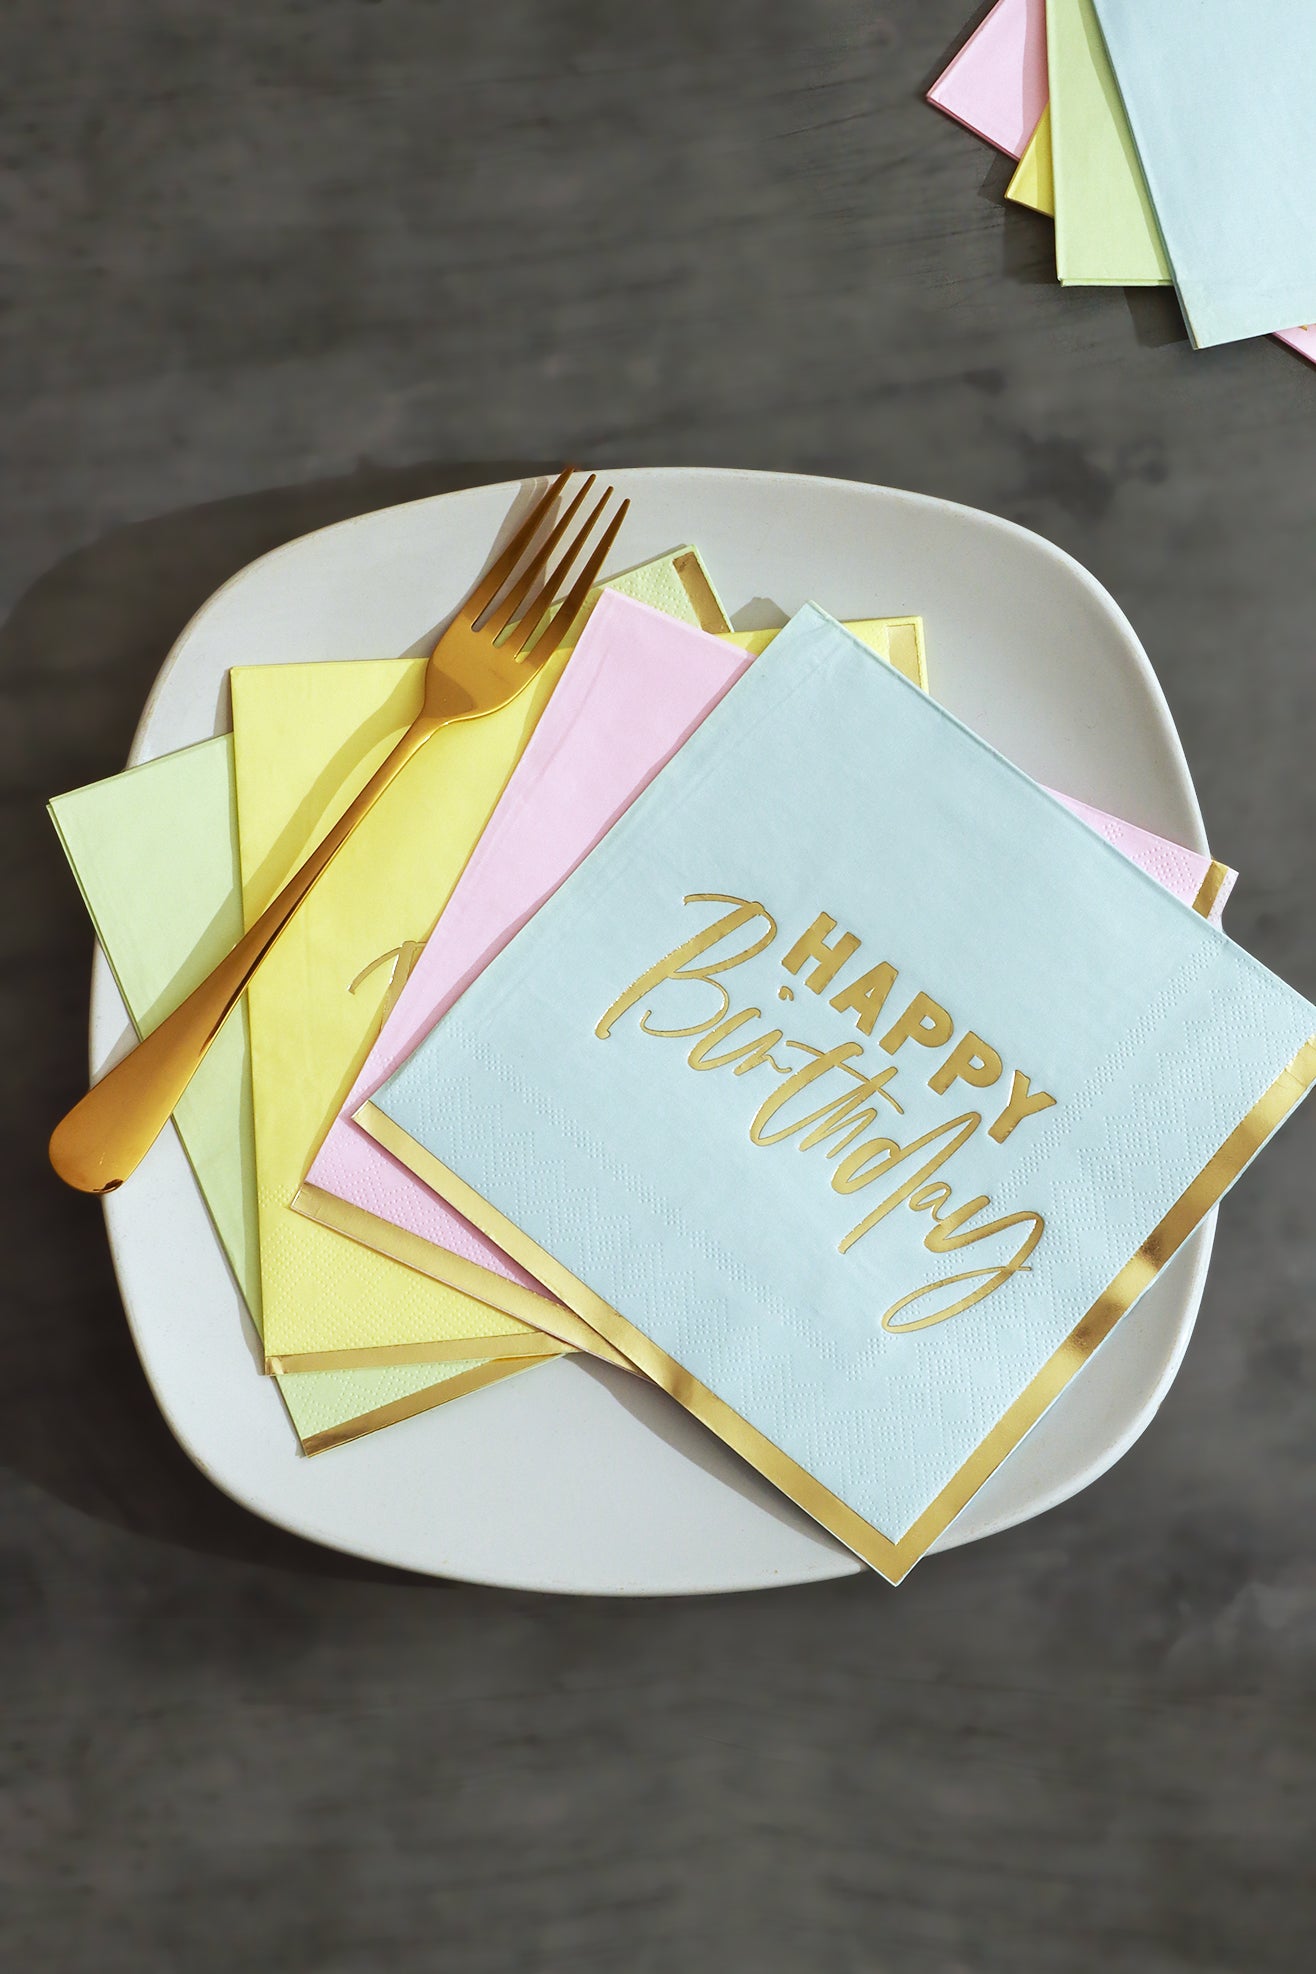 Set of 16 Pastel 3-Ply Paper Napkins with "Happy Birthday" and Gold Edges